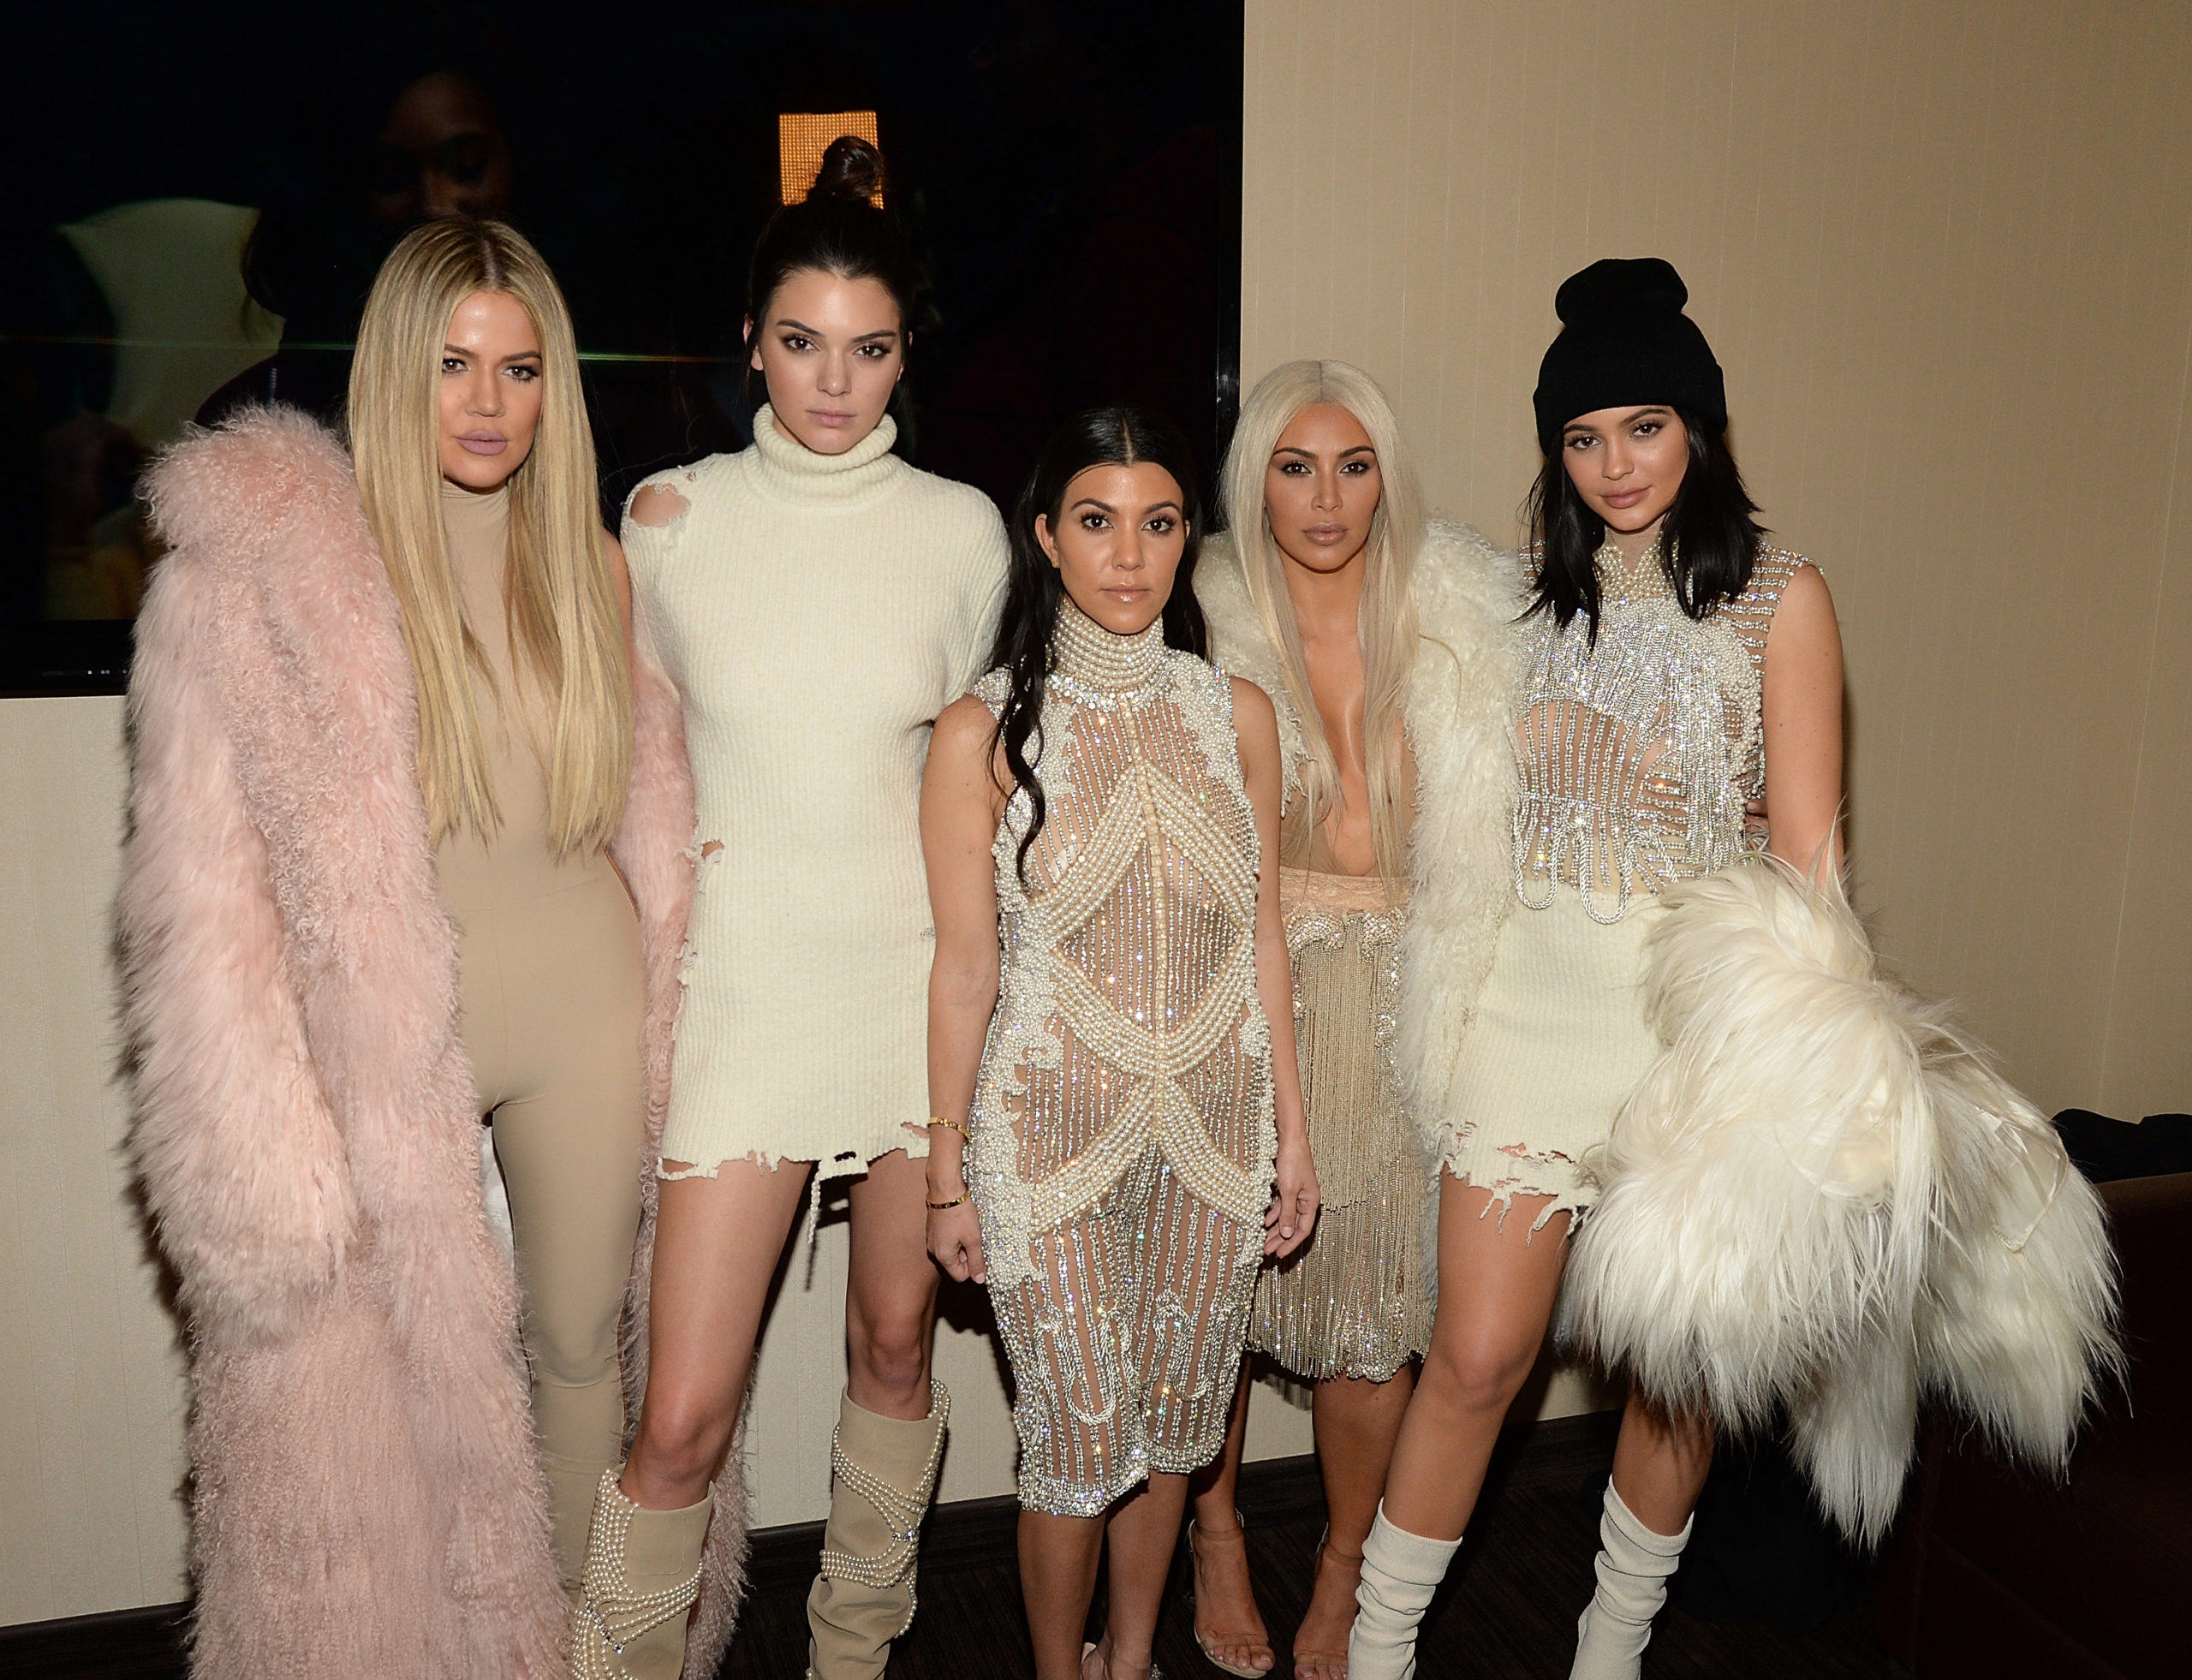 NEW YORK, NY - FEBRUARY 11: Khloe Kardashian, Kendall Jenner, Kourtney Kardashian, Kim Kardashian West and Kylie Jenner attend Kanye West Yeezy Season 3 at Madison Square Garden on February 11, 2016 in New York City. (Photo by Kevin Mazur/Getty Images for Yeezy Season 3)